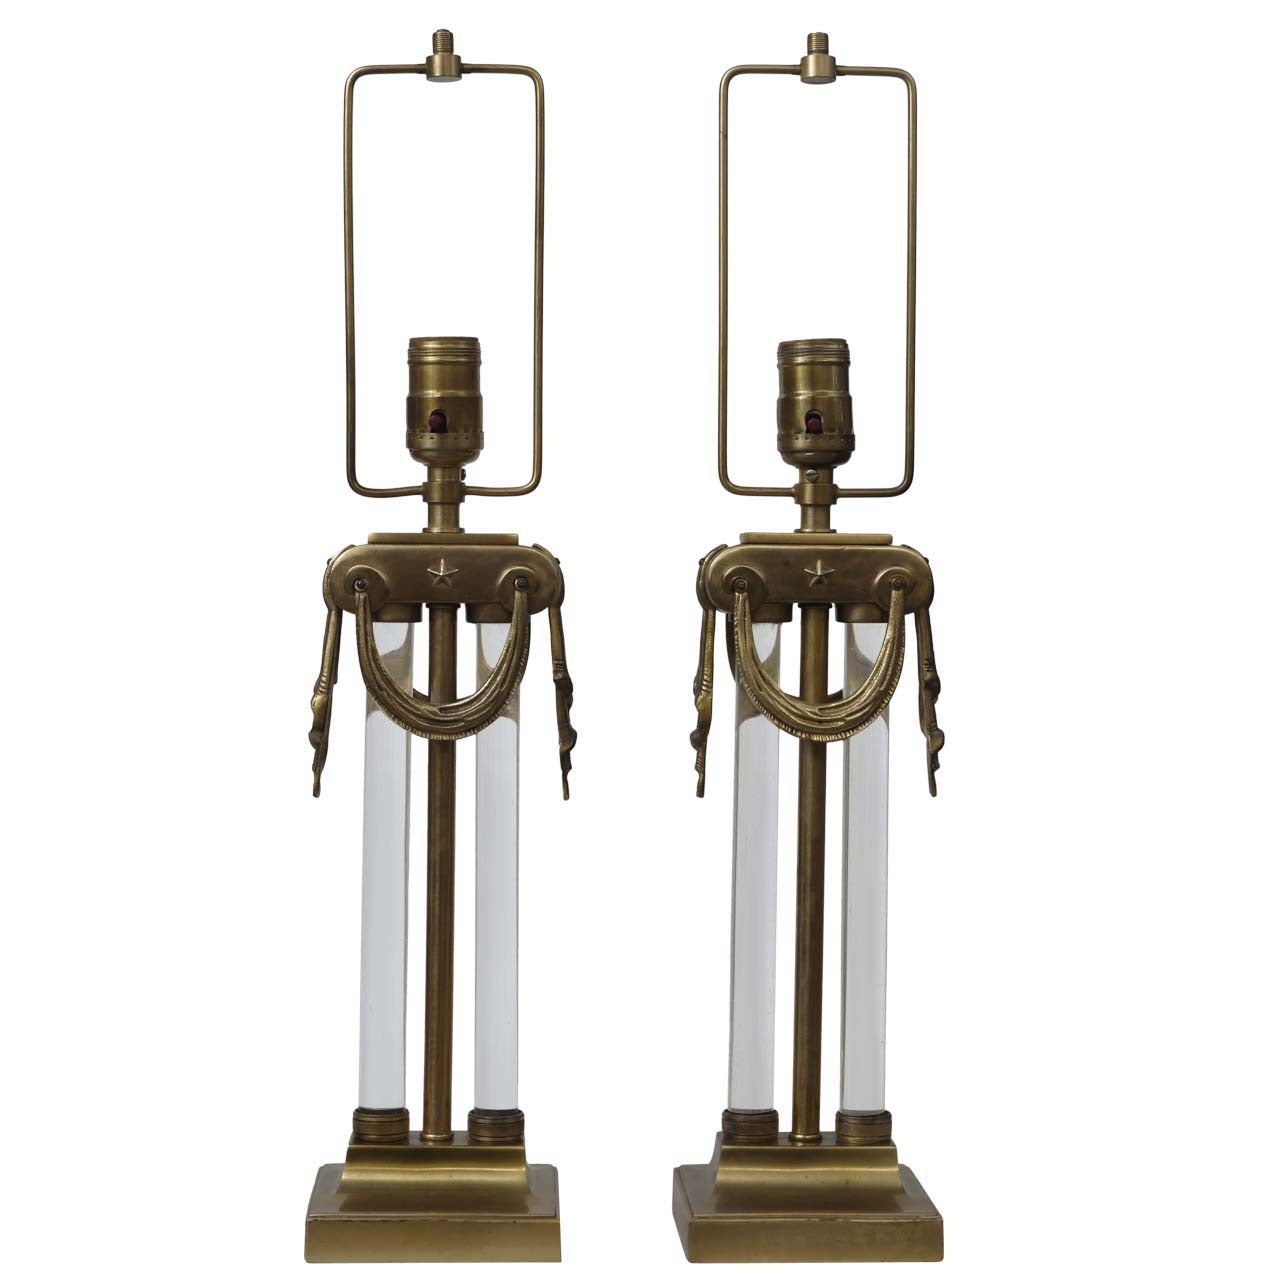 Rare Pair of Neoclassical Lamps by Mutual Sunset For Sale